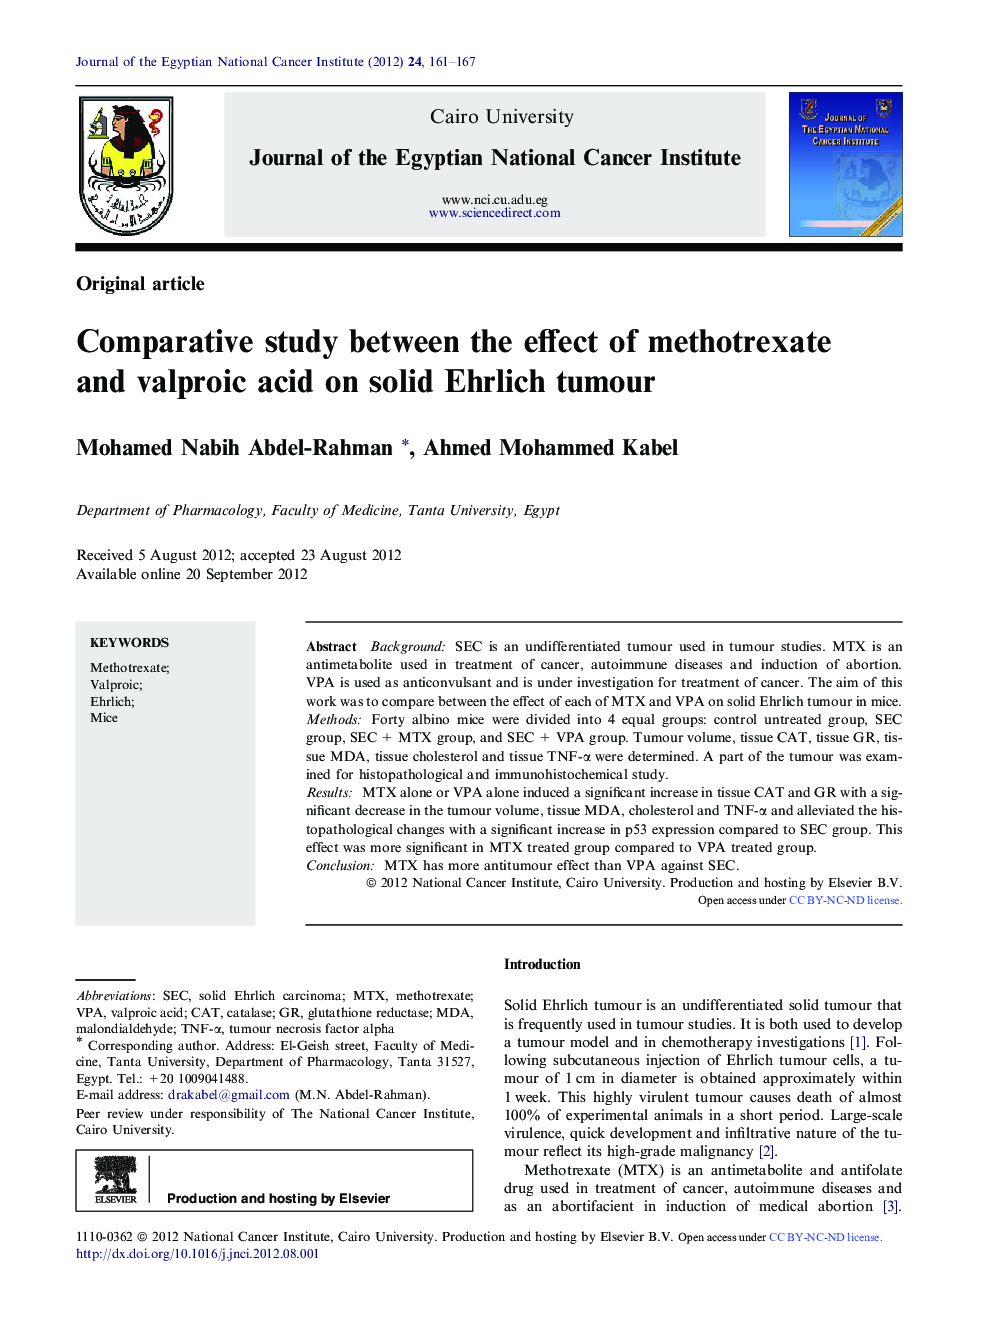 Comparative study between the effect of methotrexate and valproic acid on solid Ehrlich tumour 